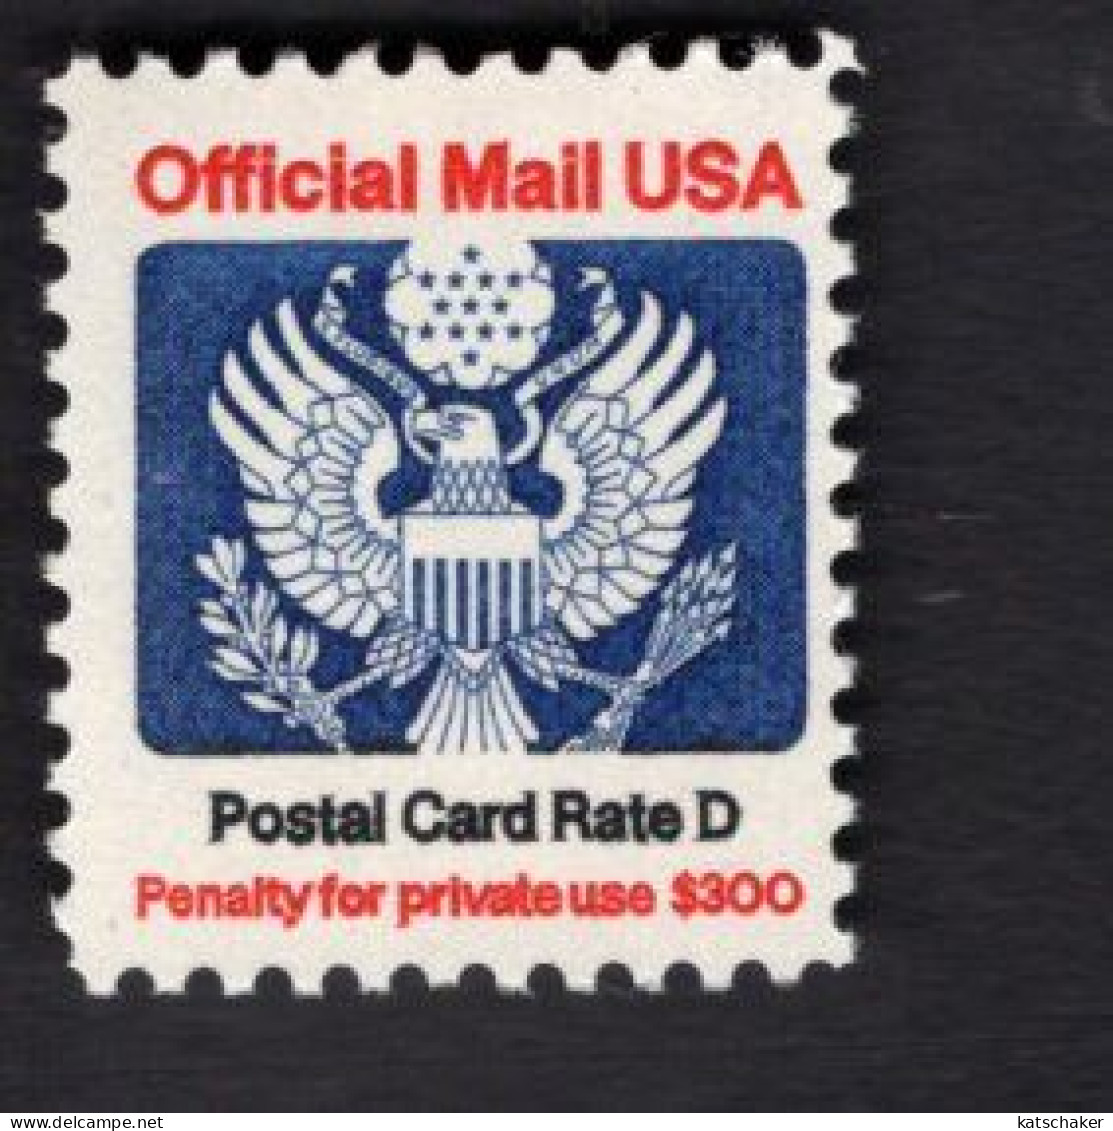 2008963964 1985 (XX) SCOTT O138 POSTFRIS MINT NEVER HINGED Eagle And Shield OFFICIAL MAIL -  POSTAL CARD RATE D - Service